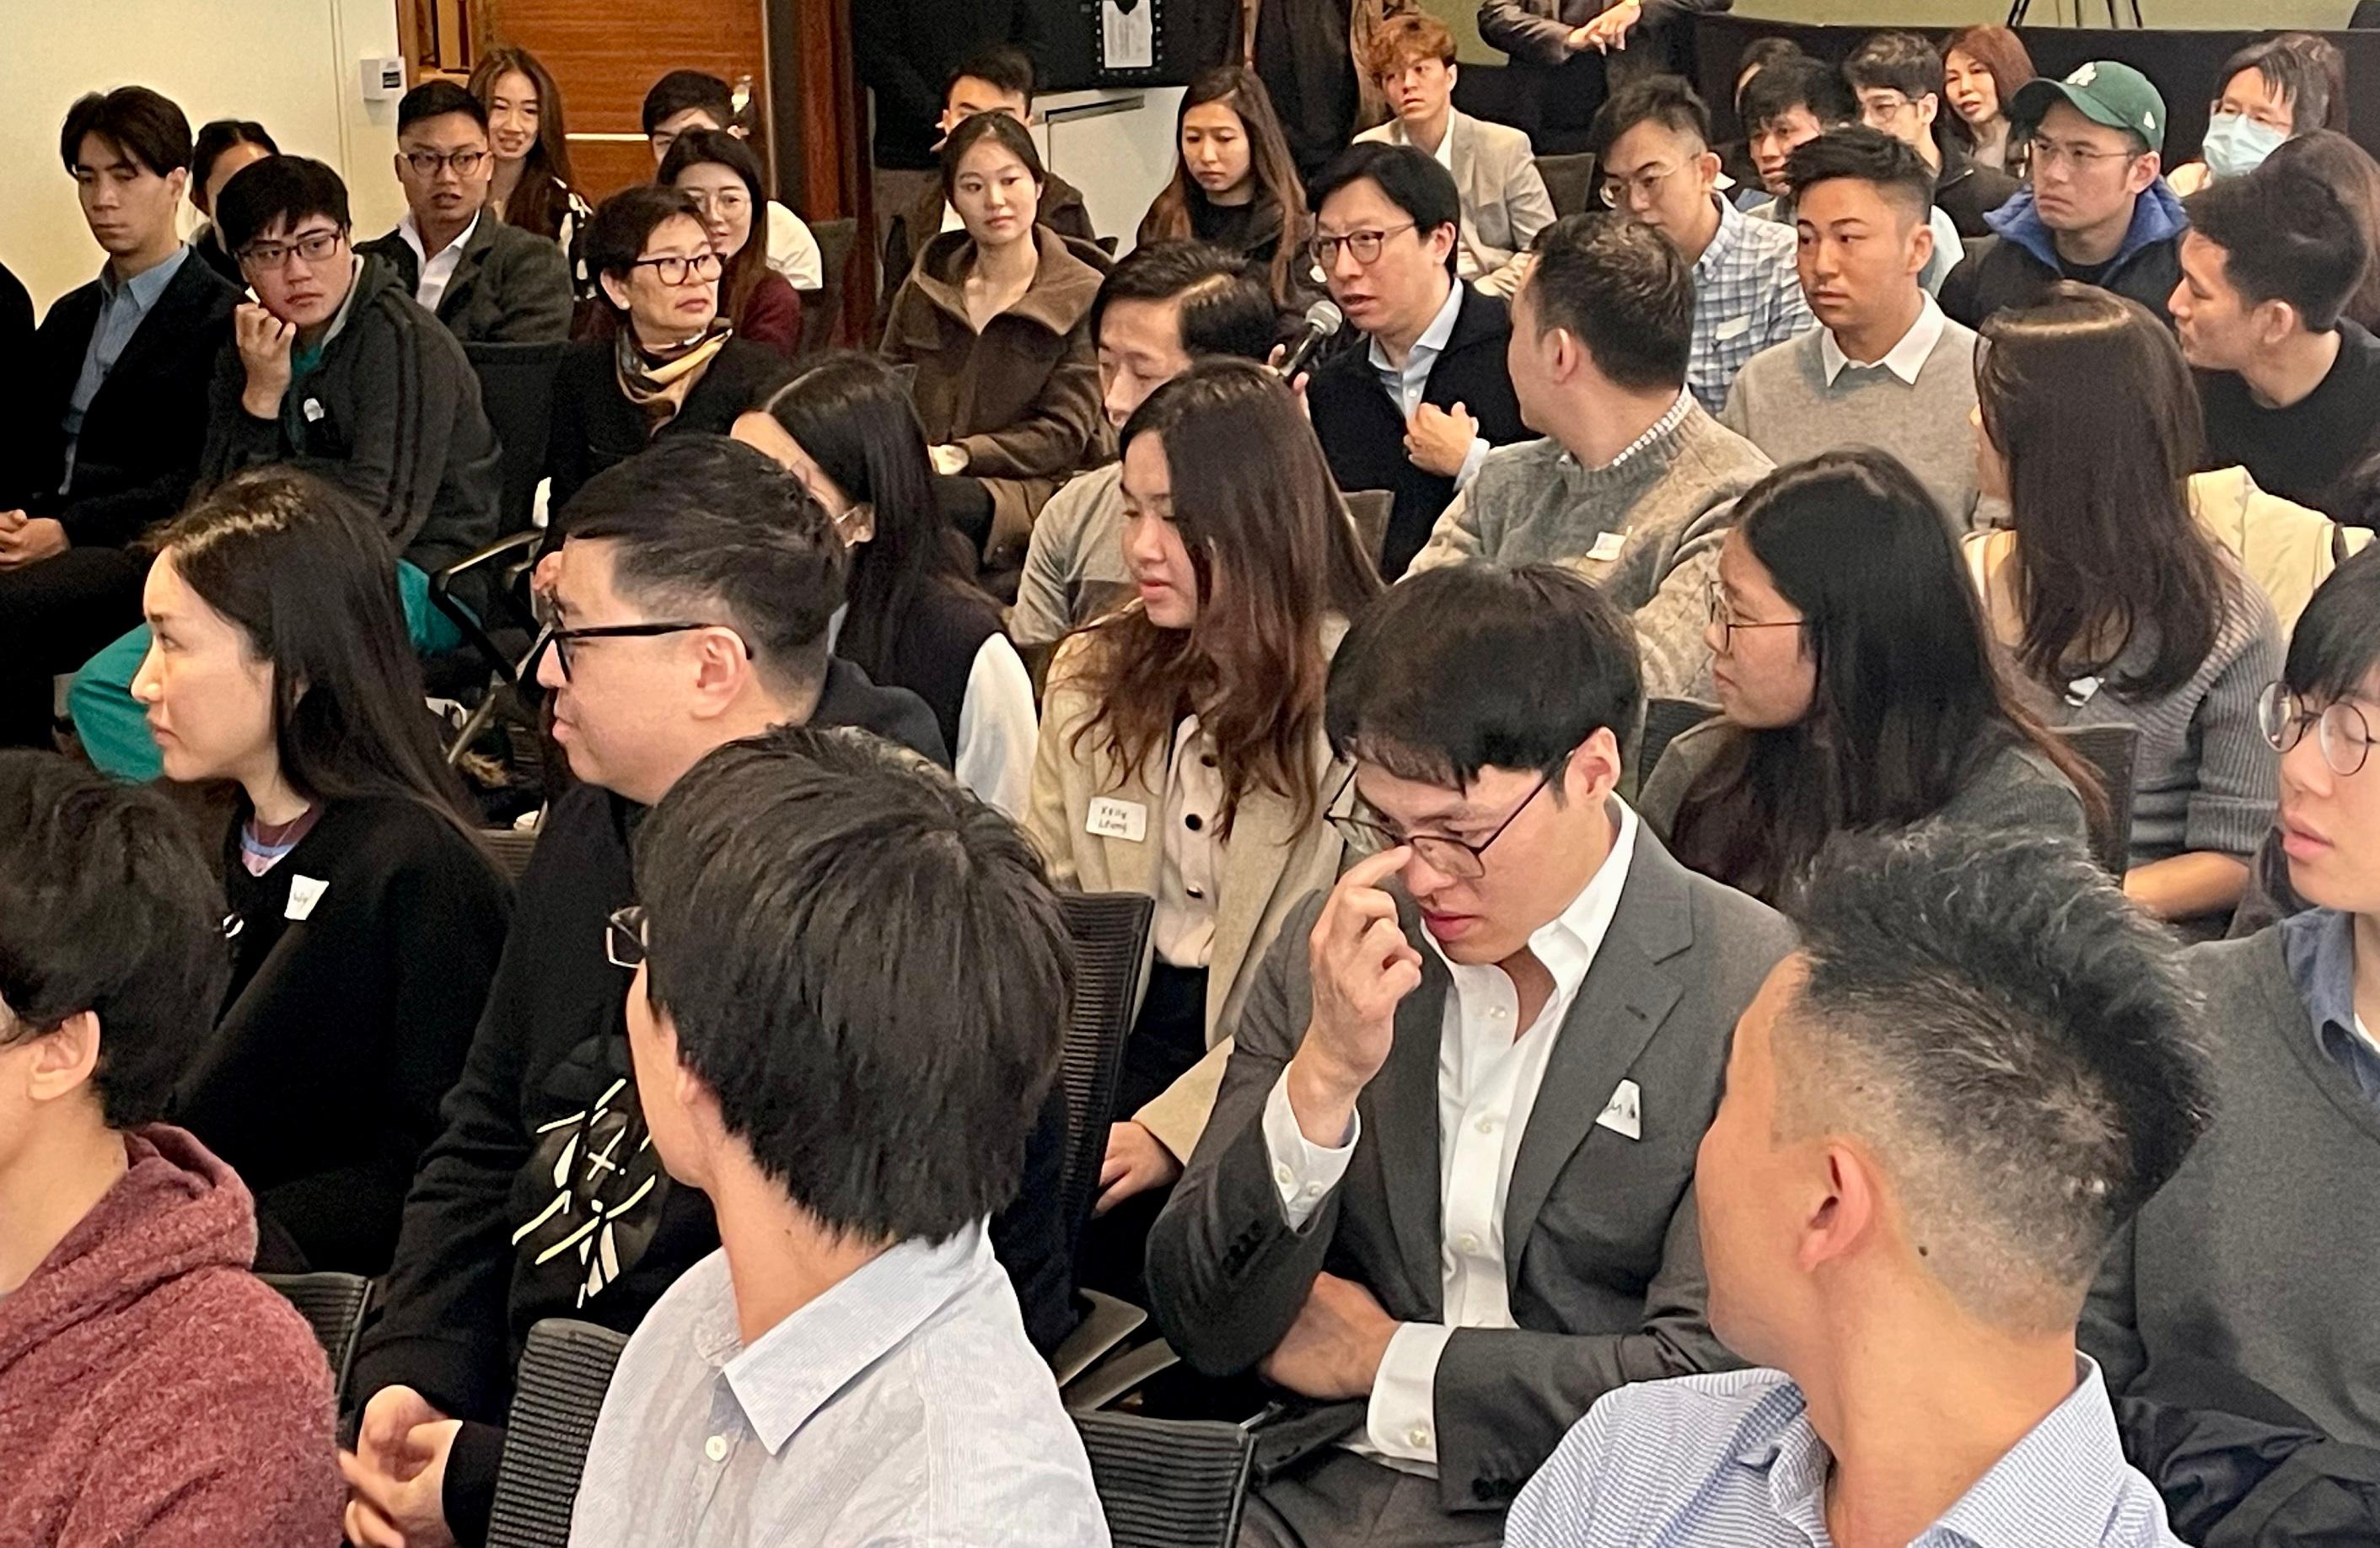 Medical students and medical practitioners from Australia exchange with the Hong Kong delegation to learn more about the working environment of public healthcare institutions, training ladders and living arrangements in Hong Kong at the Recruitment Day for non-locally trained doctors held in Sydney, Australia today (June 3).